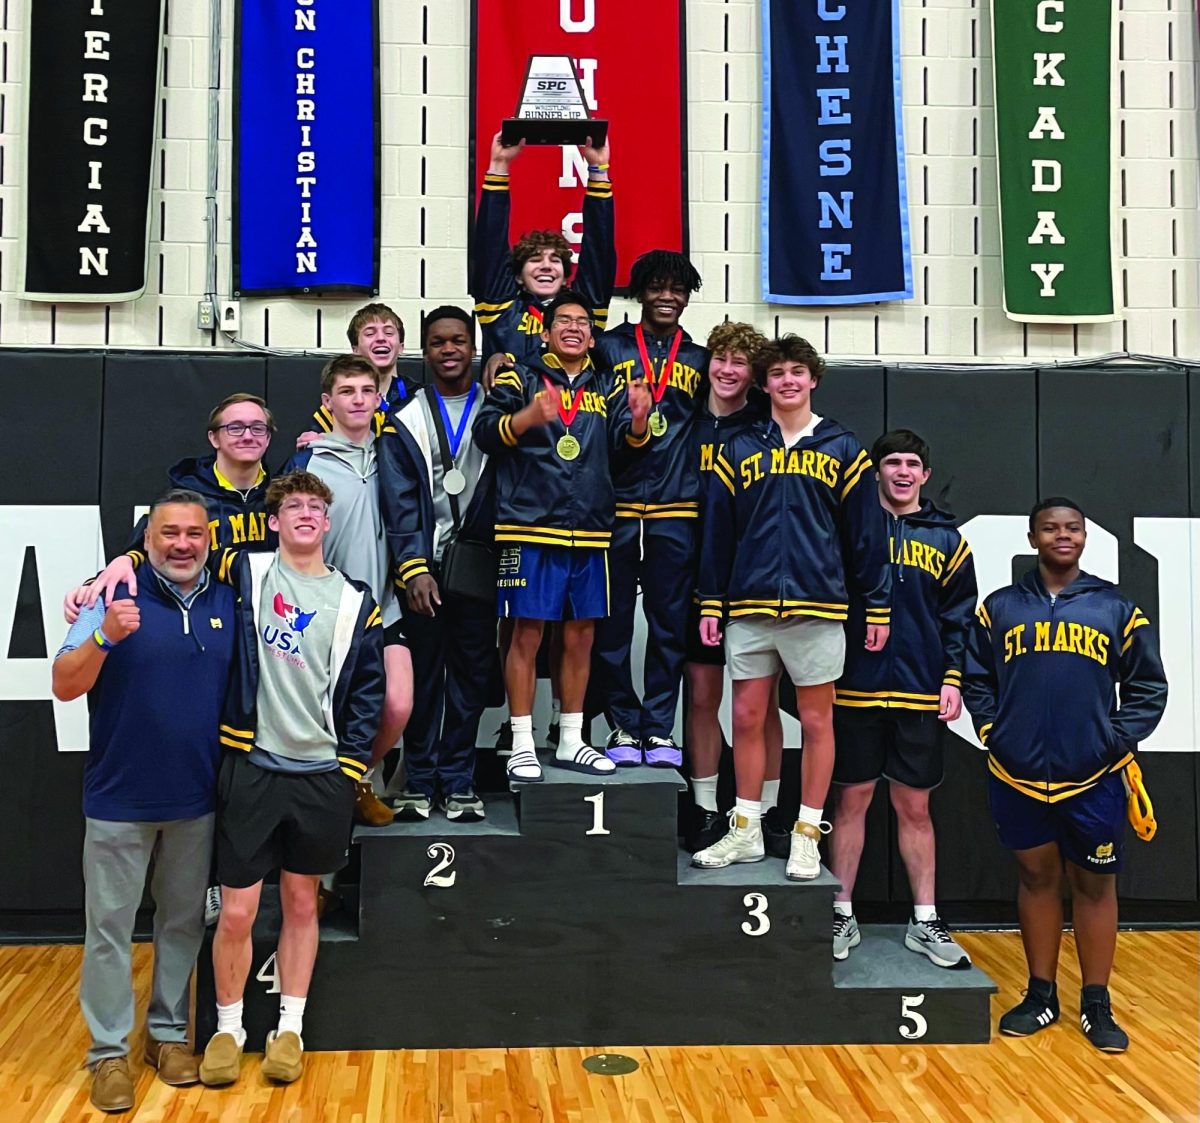 PODIUM The Lions wrestling team takes a picture on the SPC podium, with many wrestlers wearing their medals from a successful tournament.